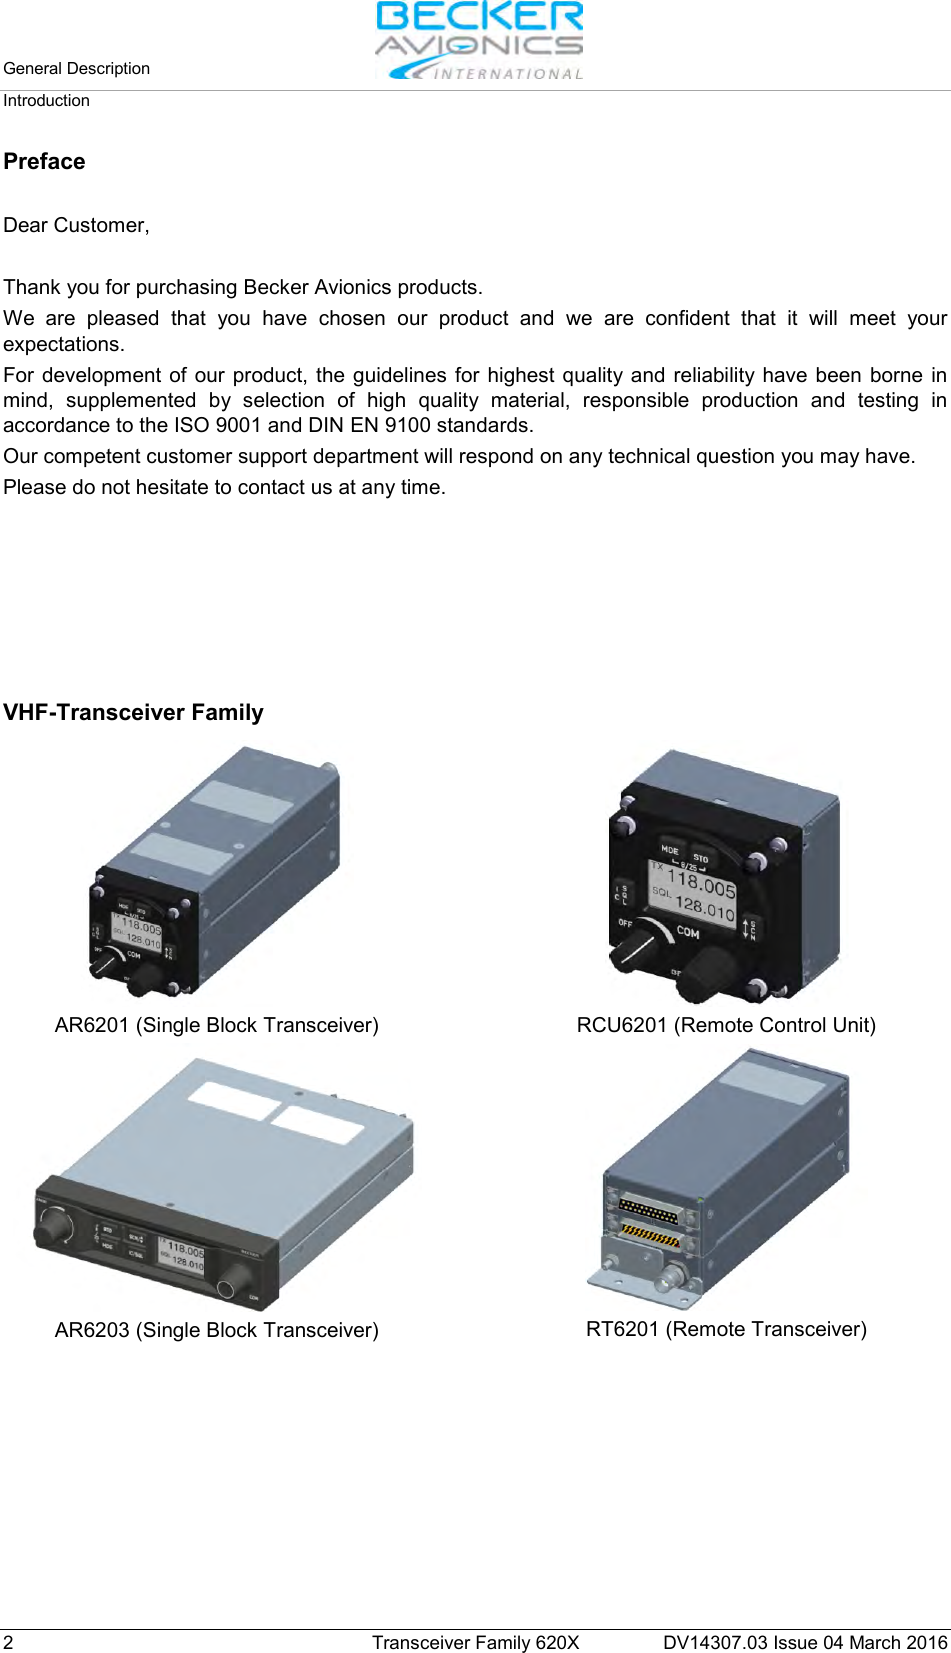 General Description   Introduction  2  Transceiver Family 620X DV14307.03 Issue 04 March 2016 Preface  Dear Customer,  Thank you for purchasing Becker Avionics products.  We are pleased that you have chosen our product and we are confident that it will meet your expectations. For development of our product, the guidelines for highest quality and reliability have been borne in mind, supplemented by selection of high quality material, responsible production and testing in accordance to the ISO 9001 and DIN EN 9100 standards. Our competent customer support department will respond on any technical question you may have. Please do not hesitate to contact us at any time.       VHF-Transceiver Family   AR6201 (Single Block Transceiver)    RCU6201 (Remote Control Unit)  AR6203 (Single Block Transceiver)    RT6201 (Remote Transceiver)   